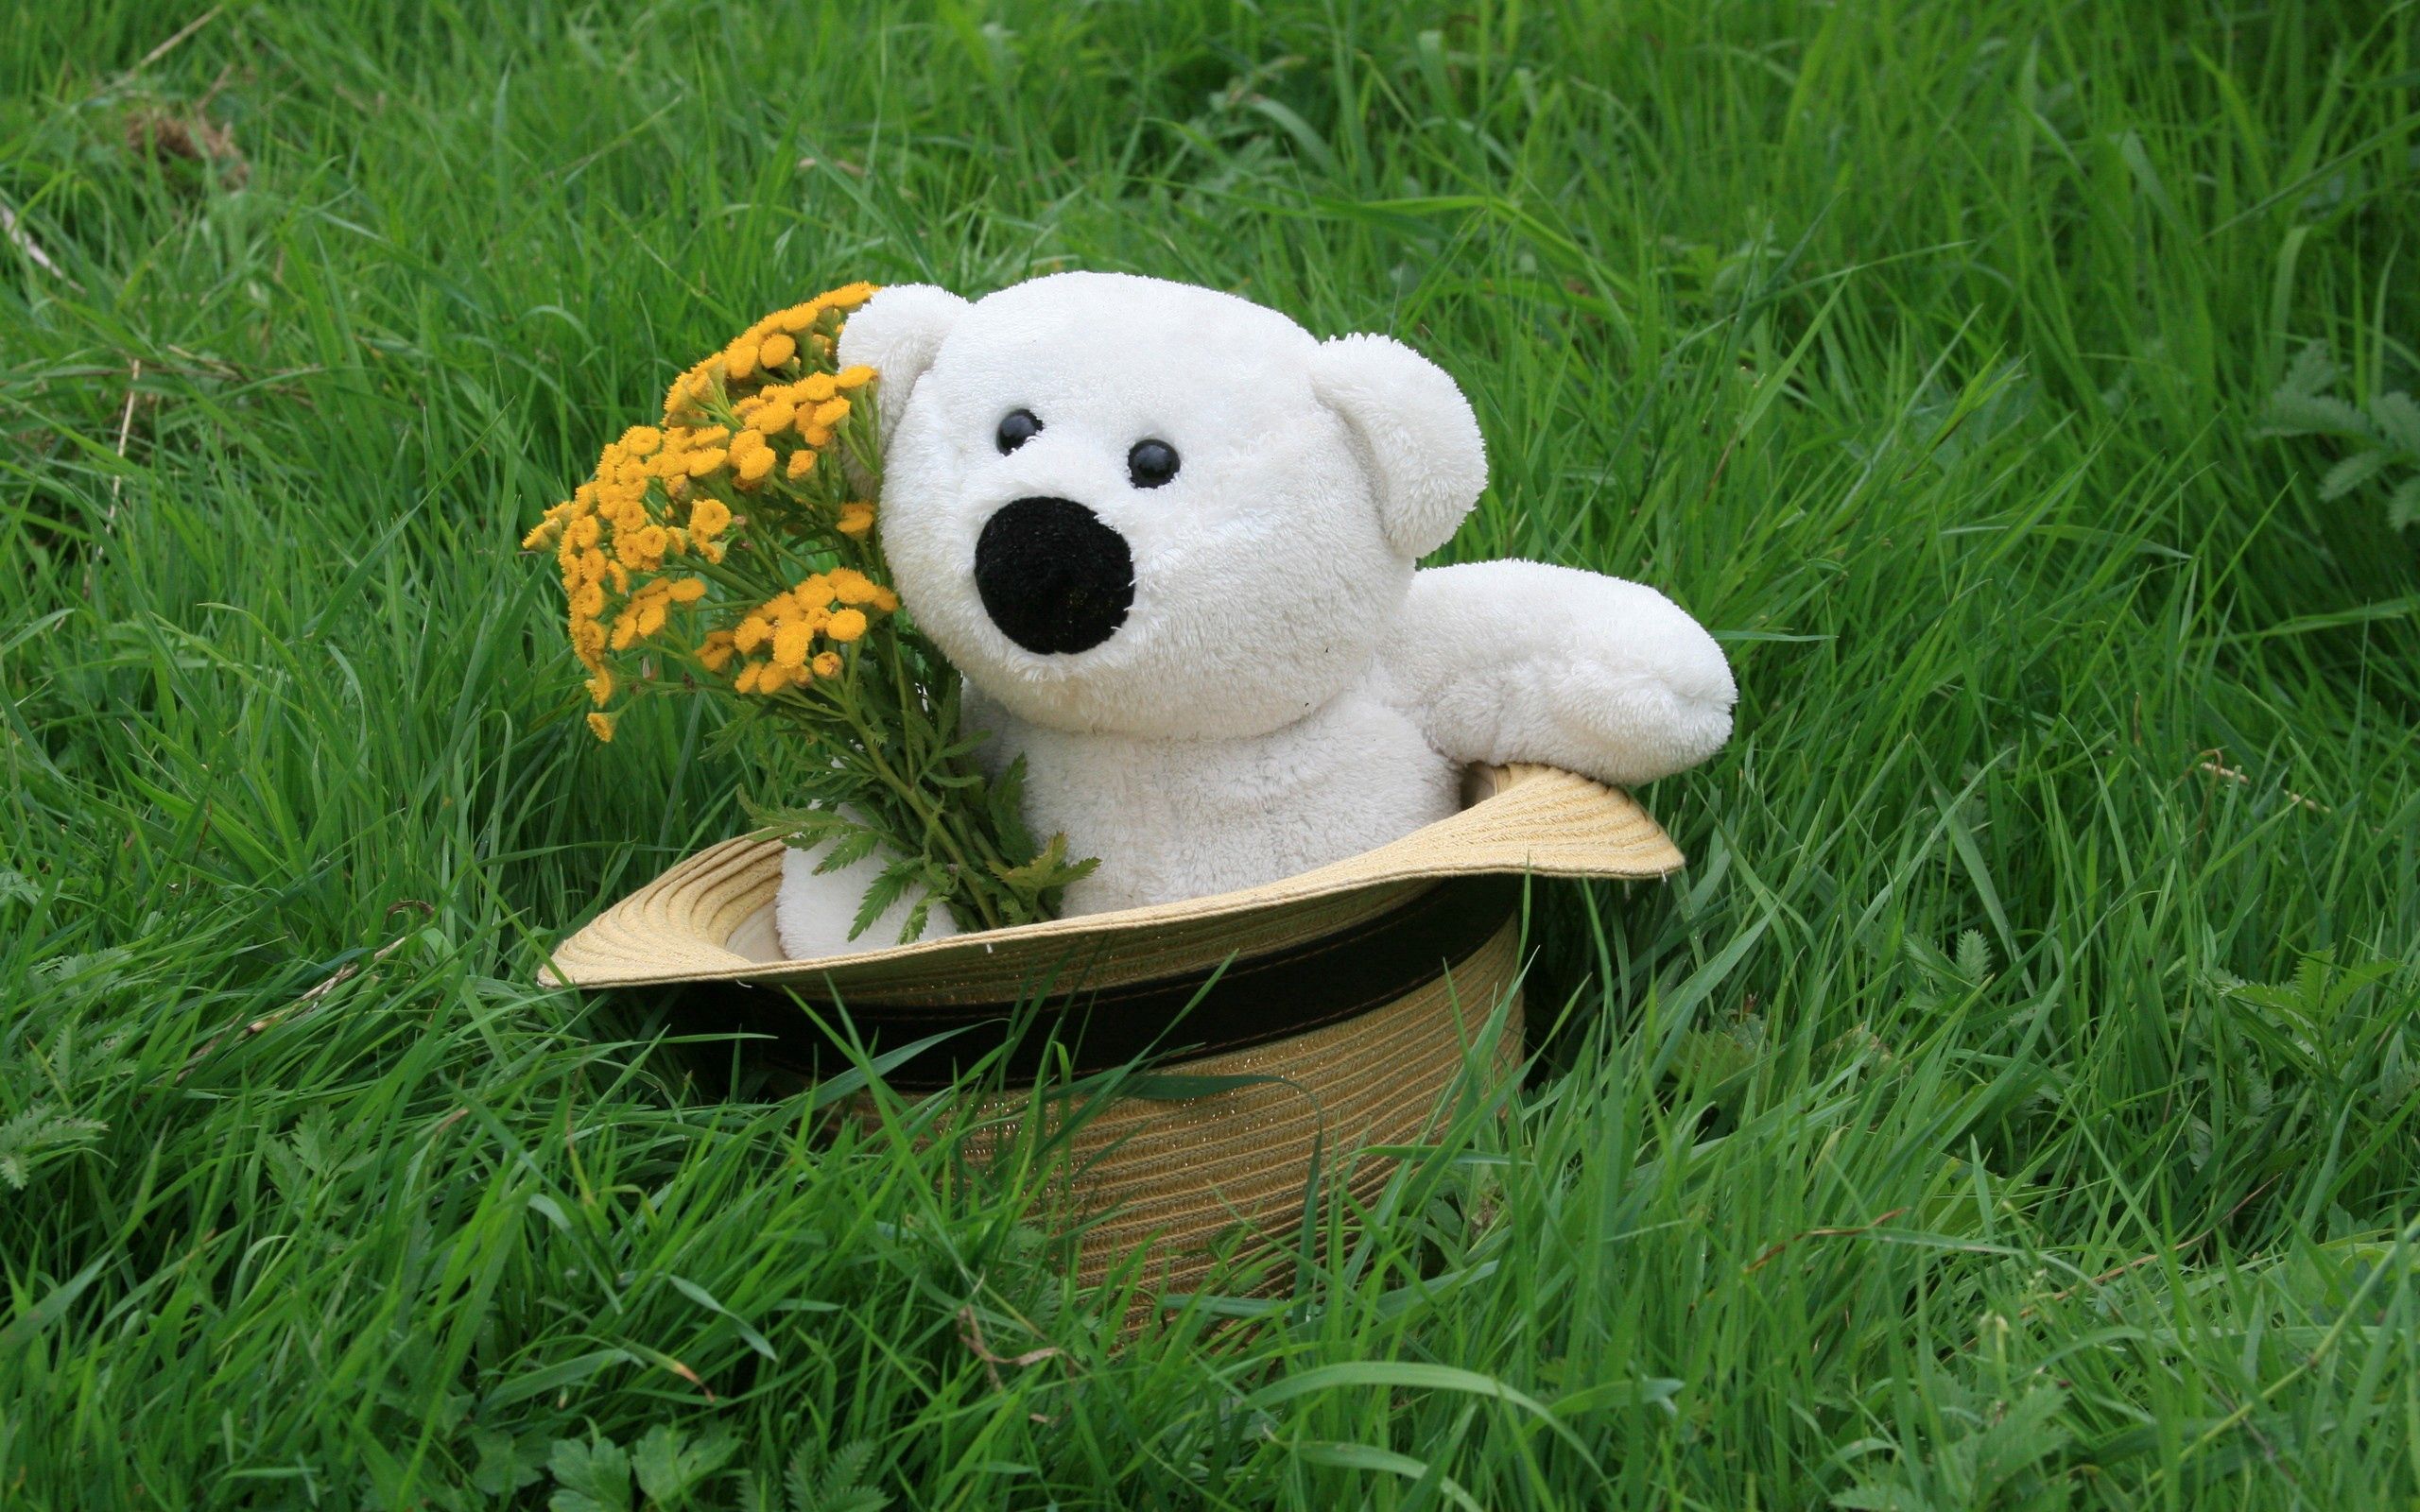 miscellaneous, flowers, grass, teddy bear, miscellanea, present, gift, hat High Definition image